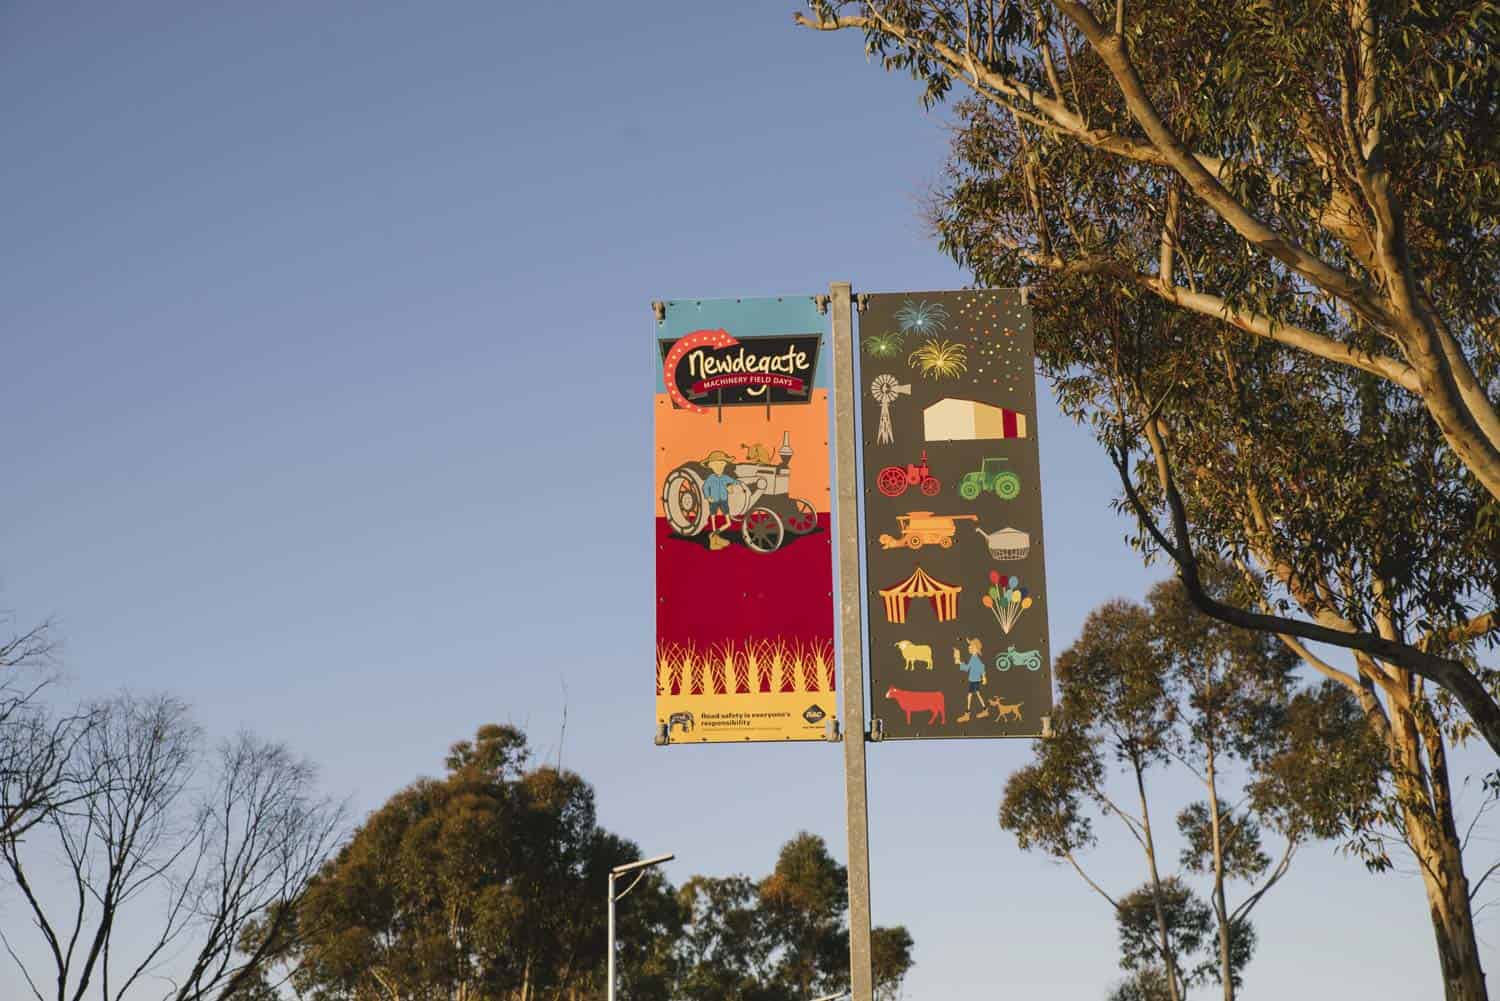 Image of the Newdegate banners hanging in the main street